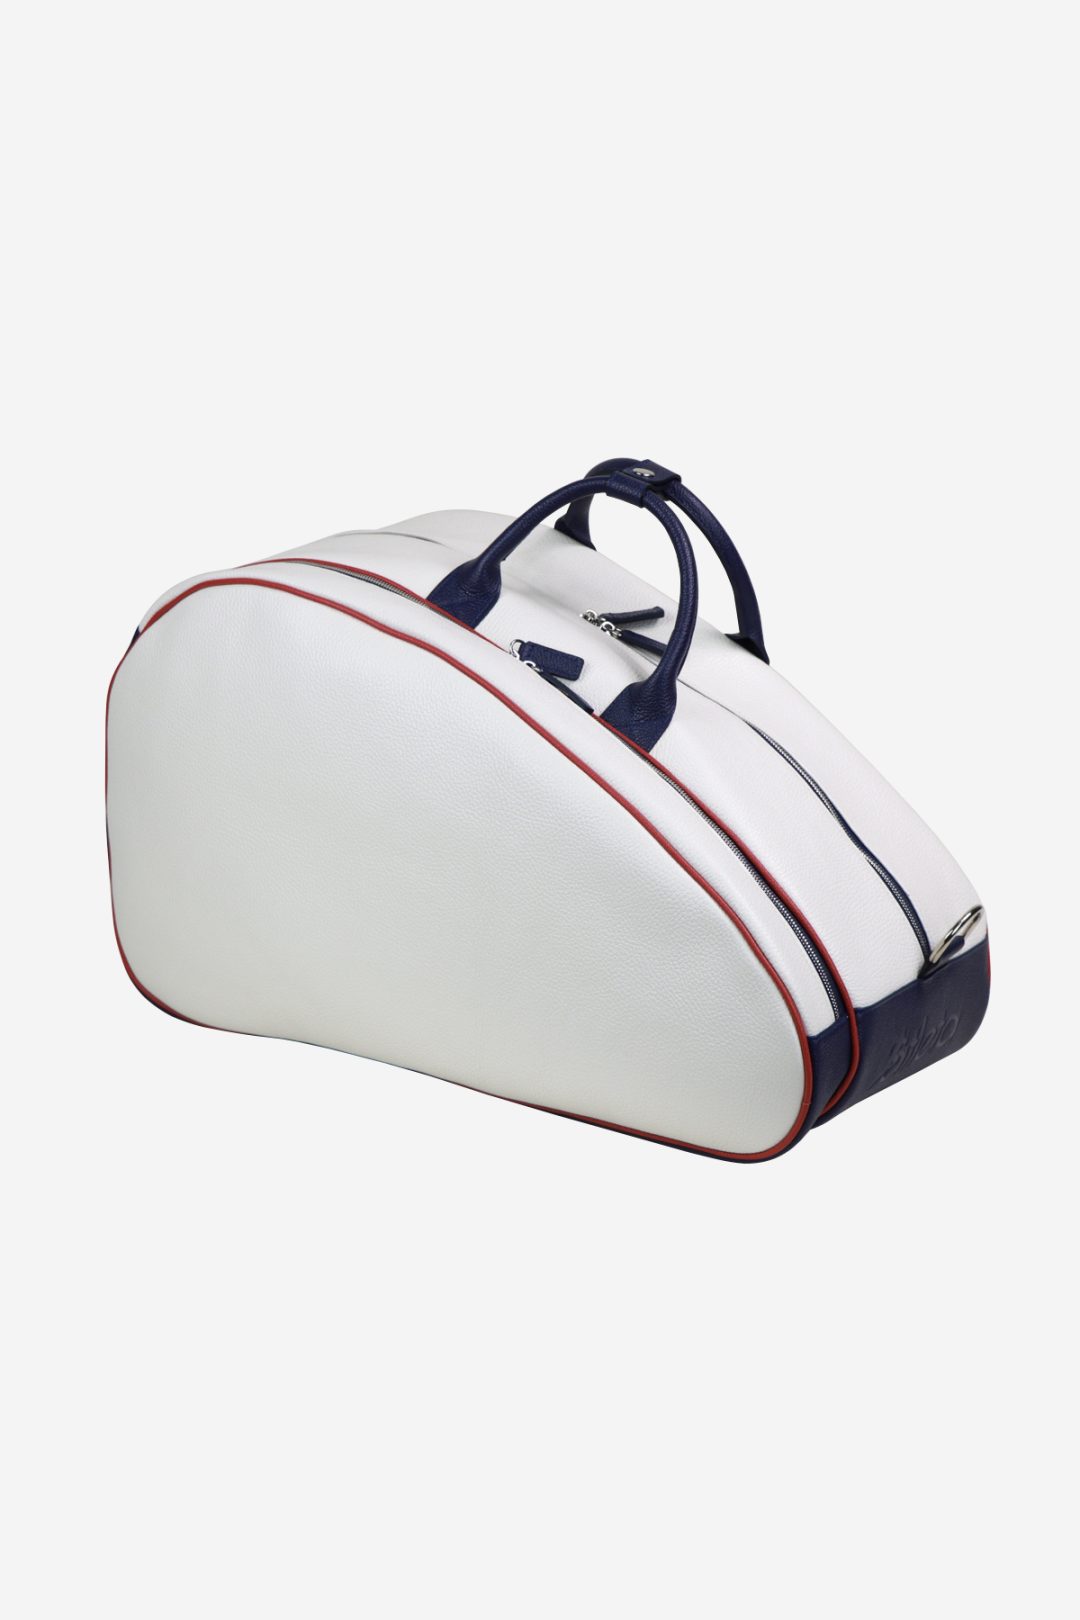 Shop Stylish and Functional Padel Bags - Carry Your Gear with Ease – Padel  USA